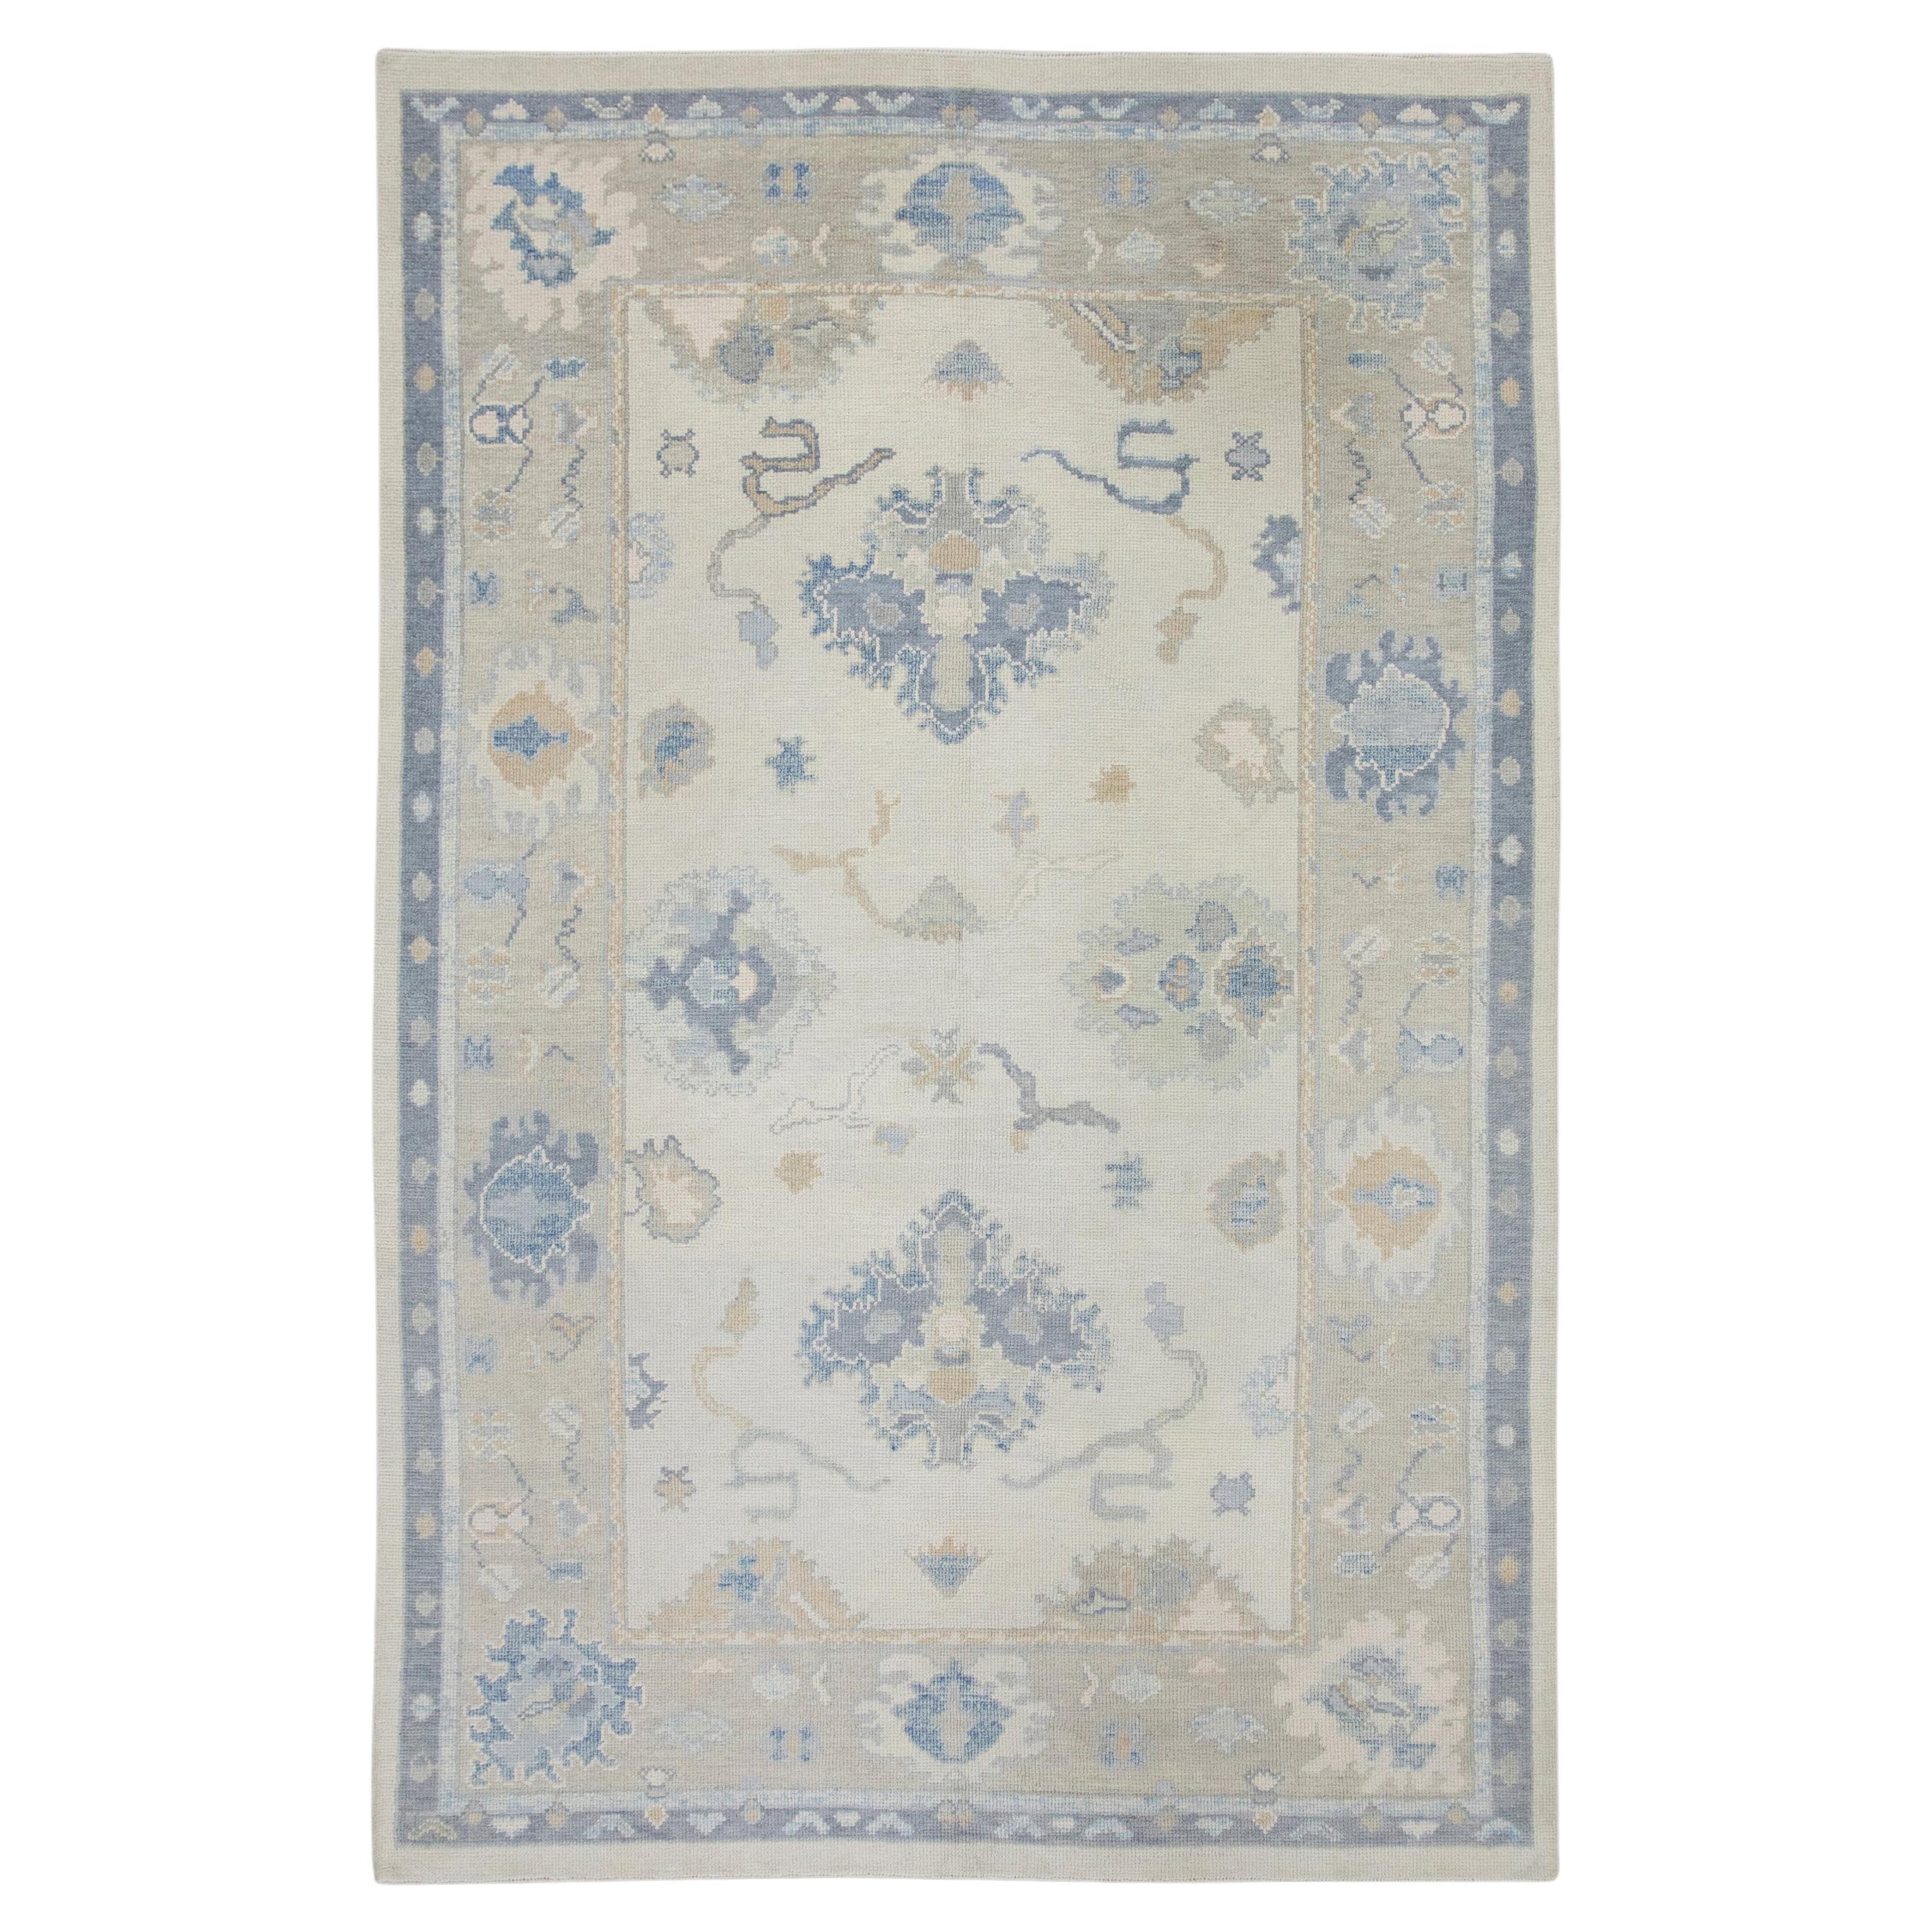 Taupe and Blue Floral Handwoven Wool Turkish Oushak Rug 6' x 8'9" For Sale